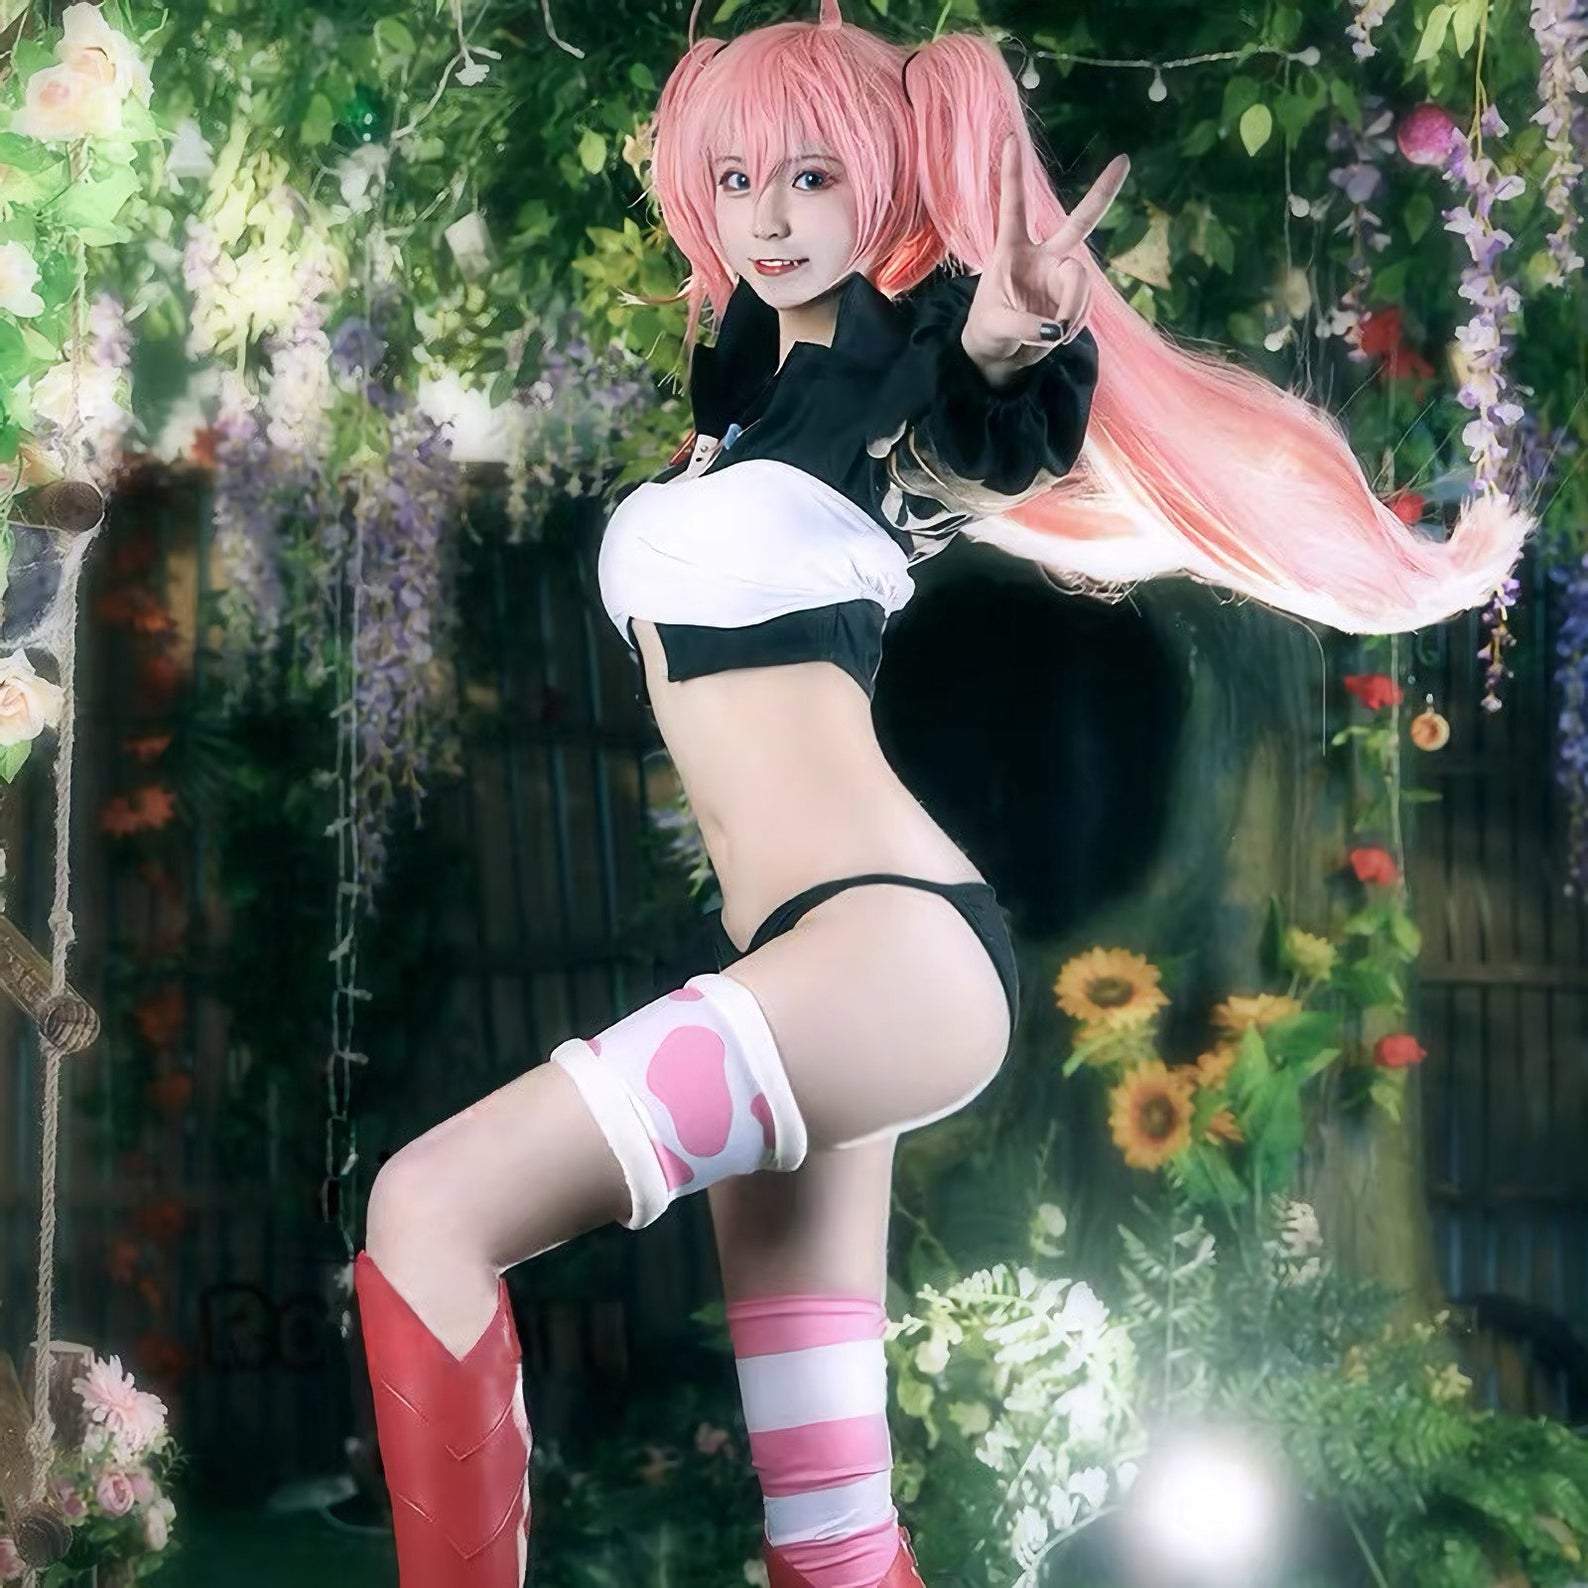 Demon Lord Milim Nava Cosplay Costume High quality That Time I Got Reincarnated as a Slime Cos Full Set Sexy Slime Pink Wig-Featured Collection, Got Reincarnated As A Slime - MoonCos